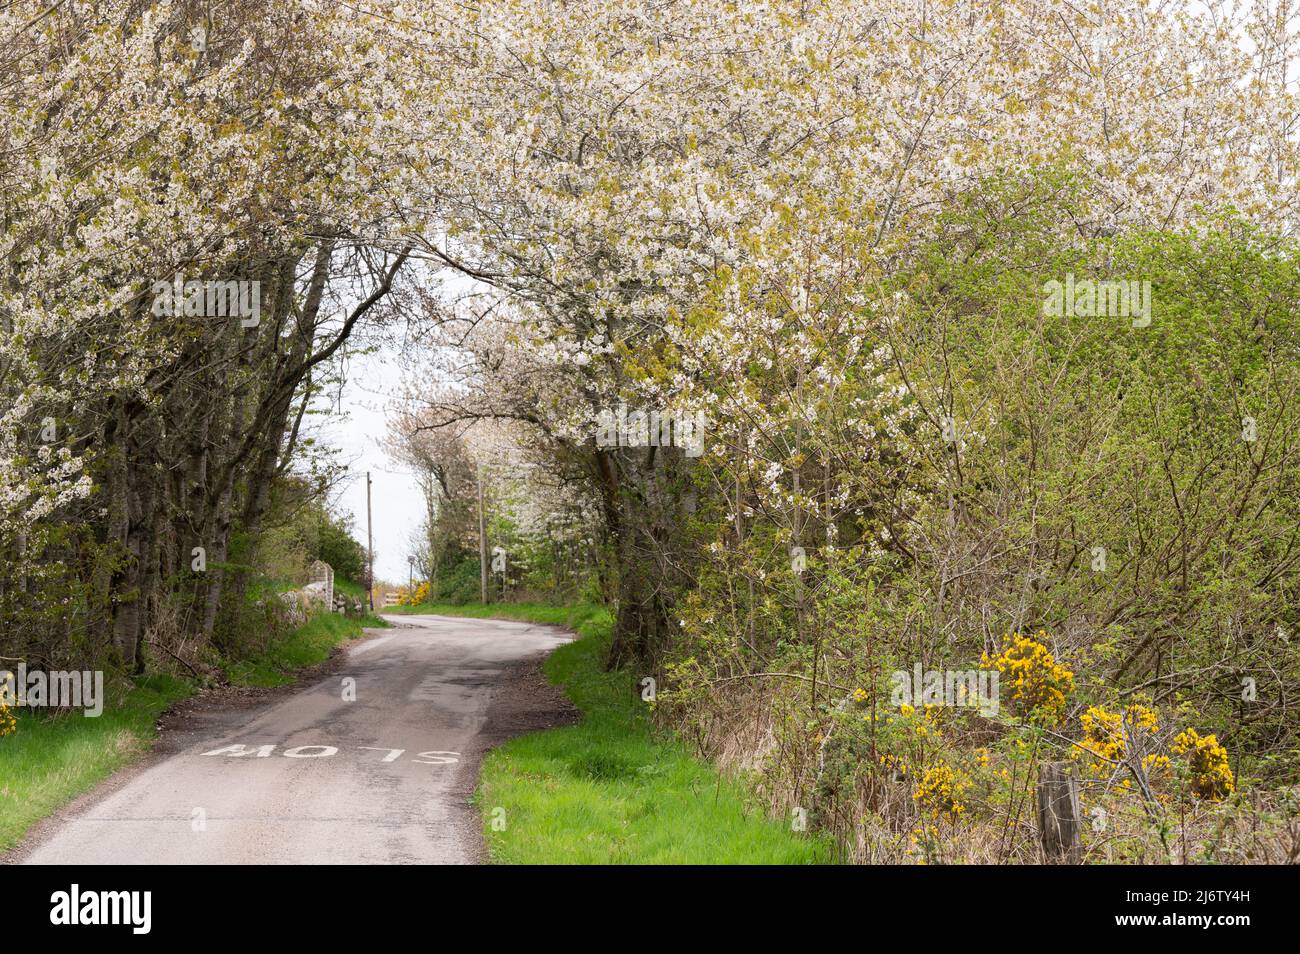 The back road along the Dornoch Firth into Dornoch itself was filled with blossom this morning. Stock Photo